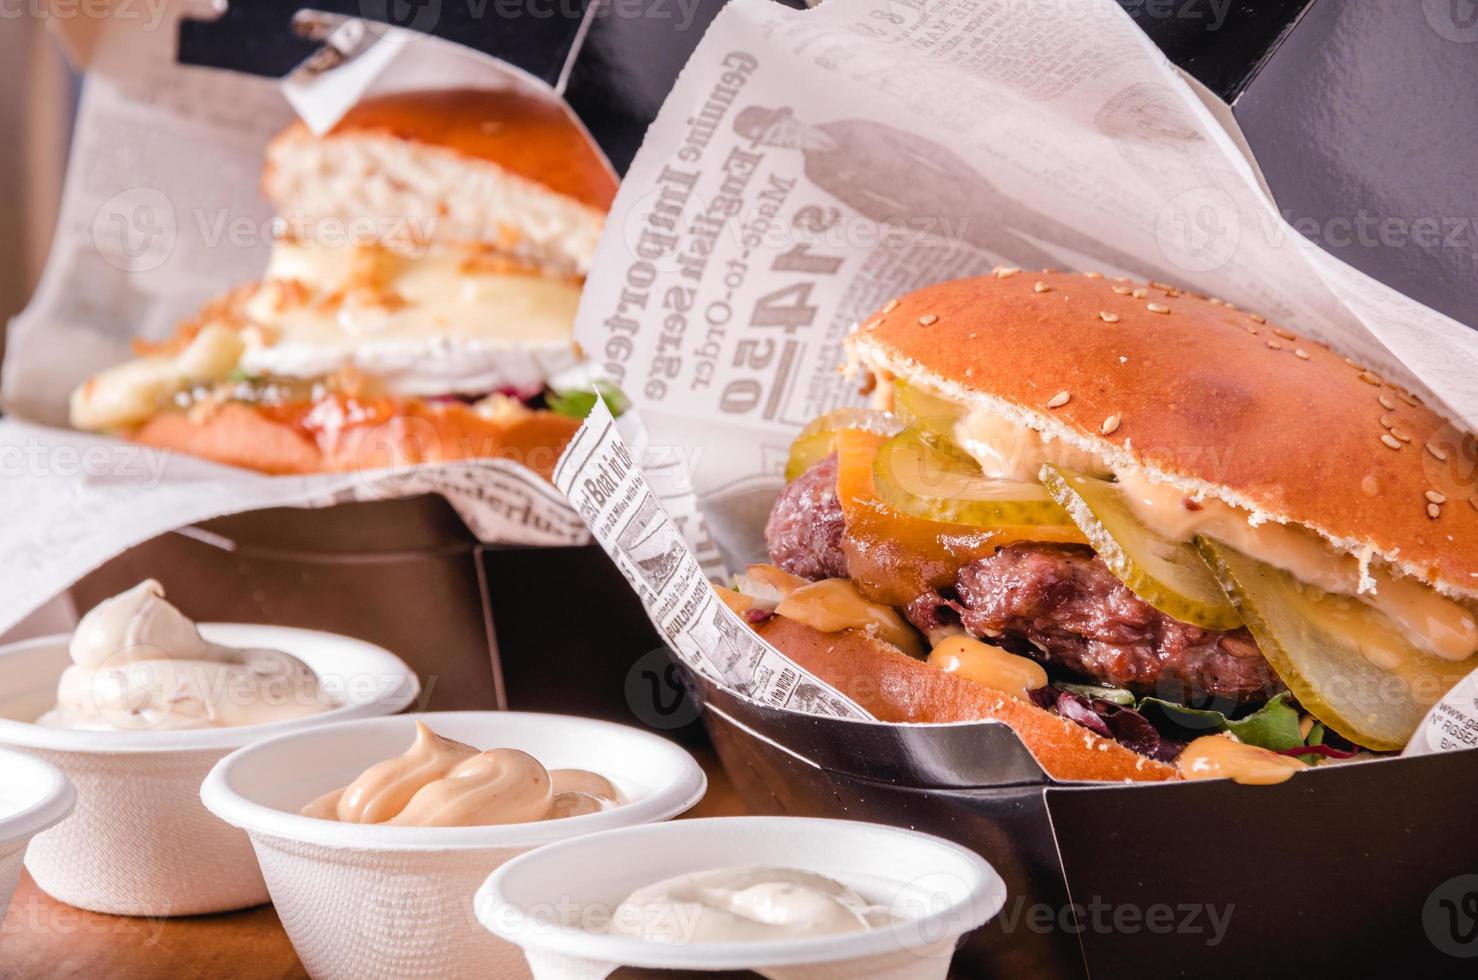 Burgers and dip sauces in takeaway containers. Fast food delivery concept photo